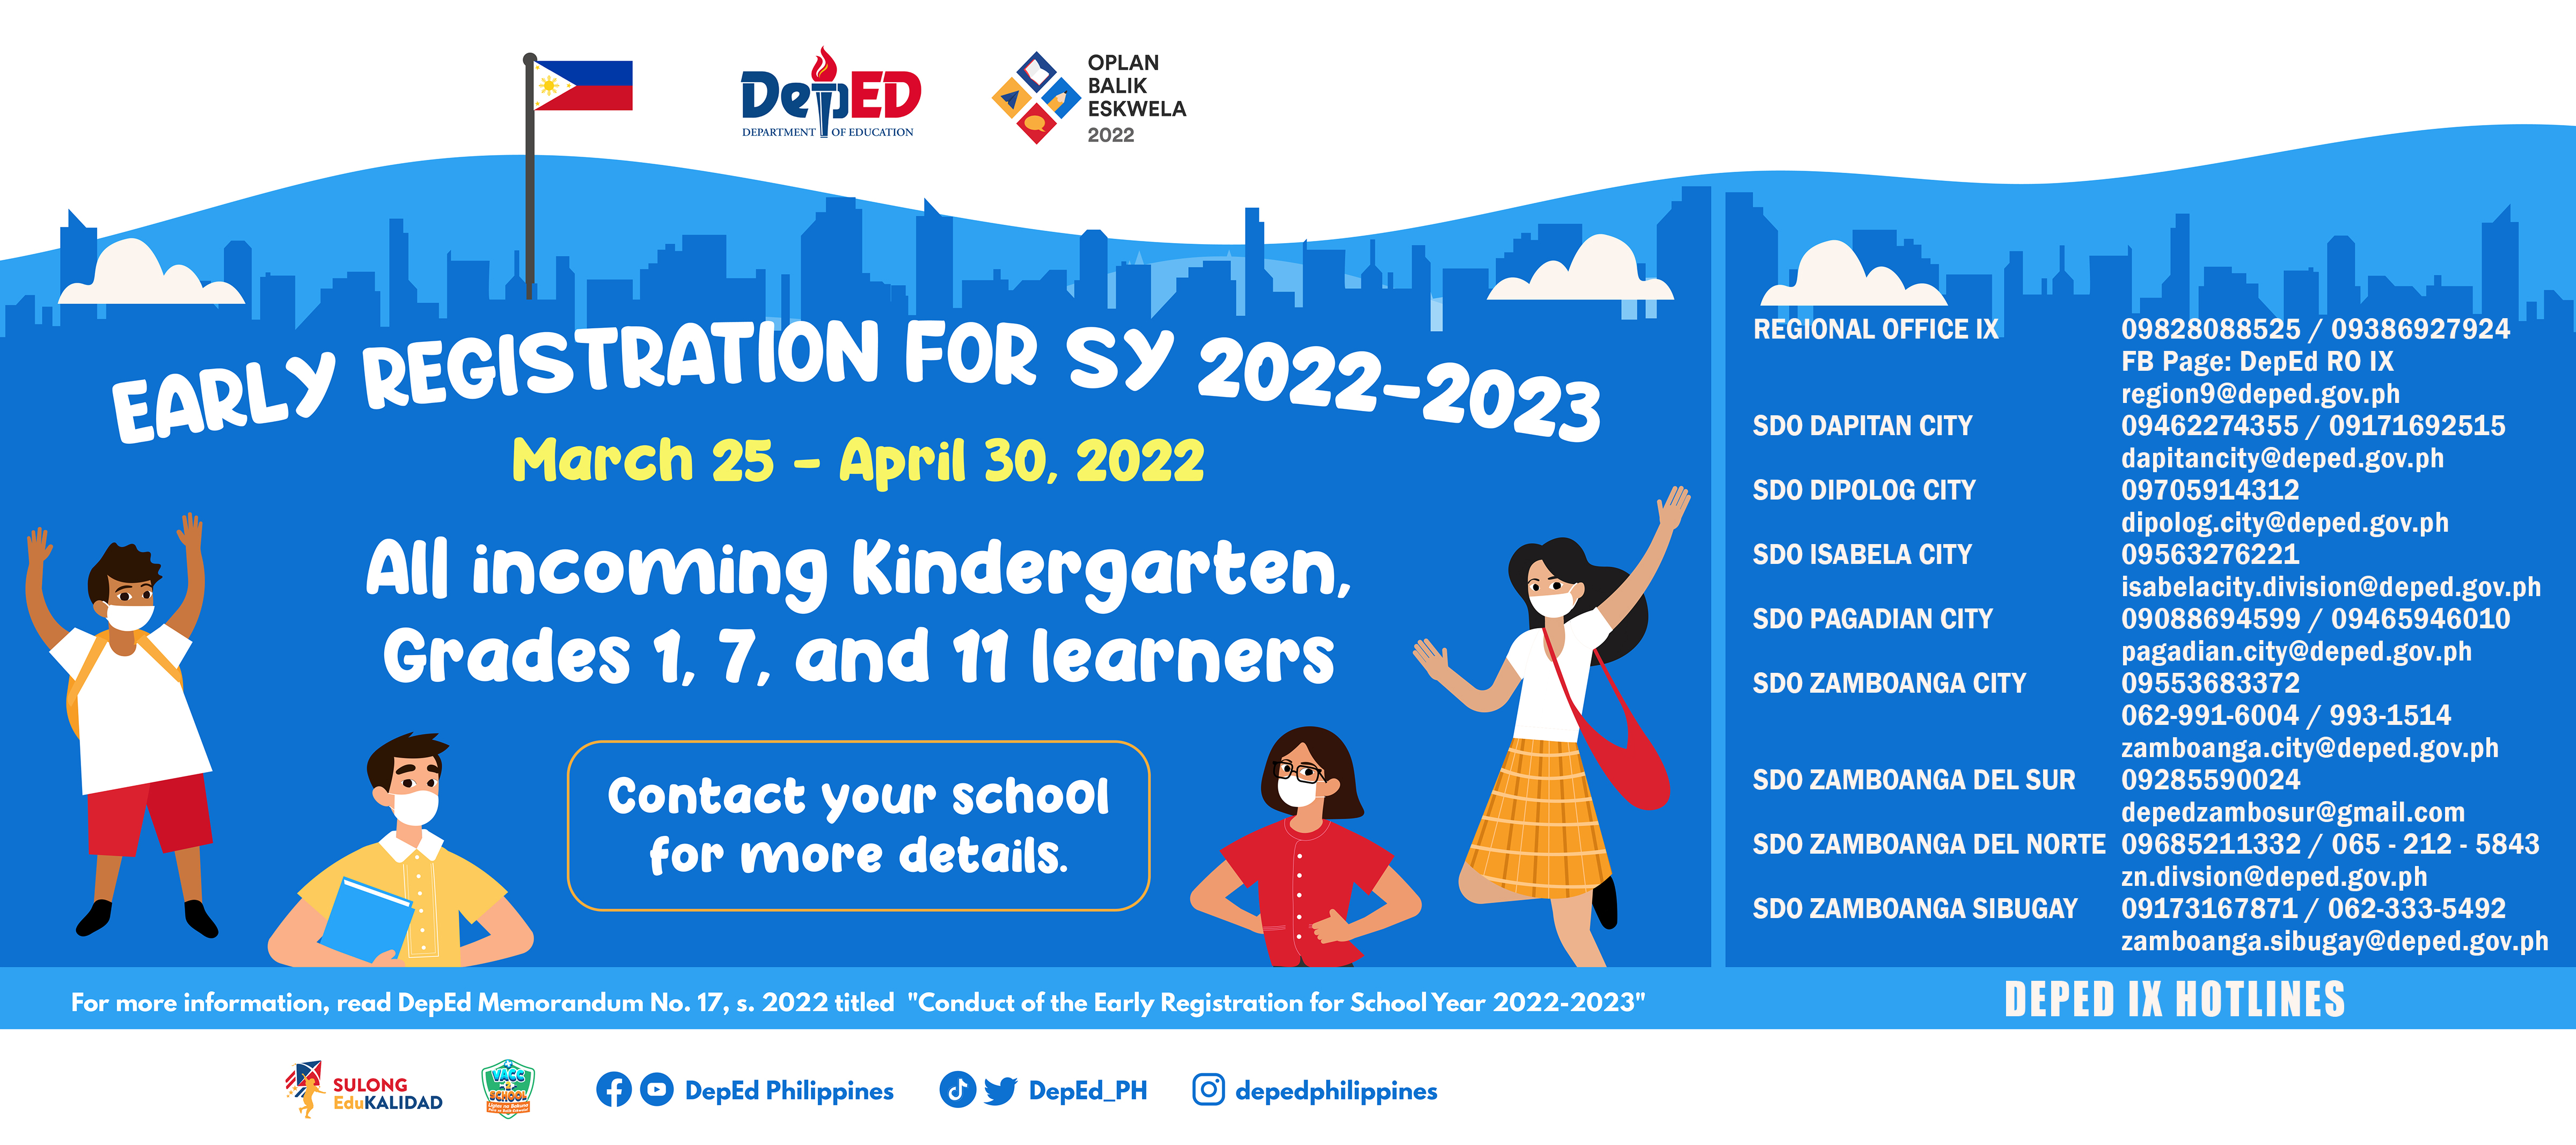 EARLY REGISTRATION FOR SY 2022 - 2023